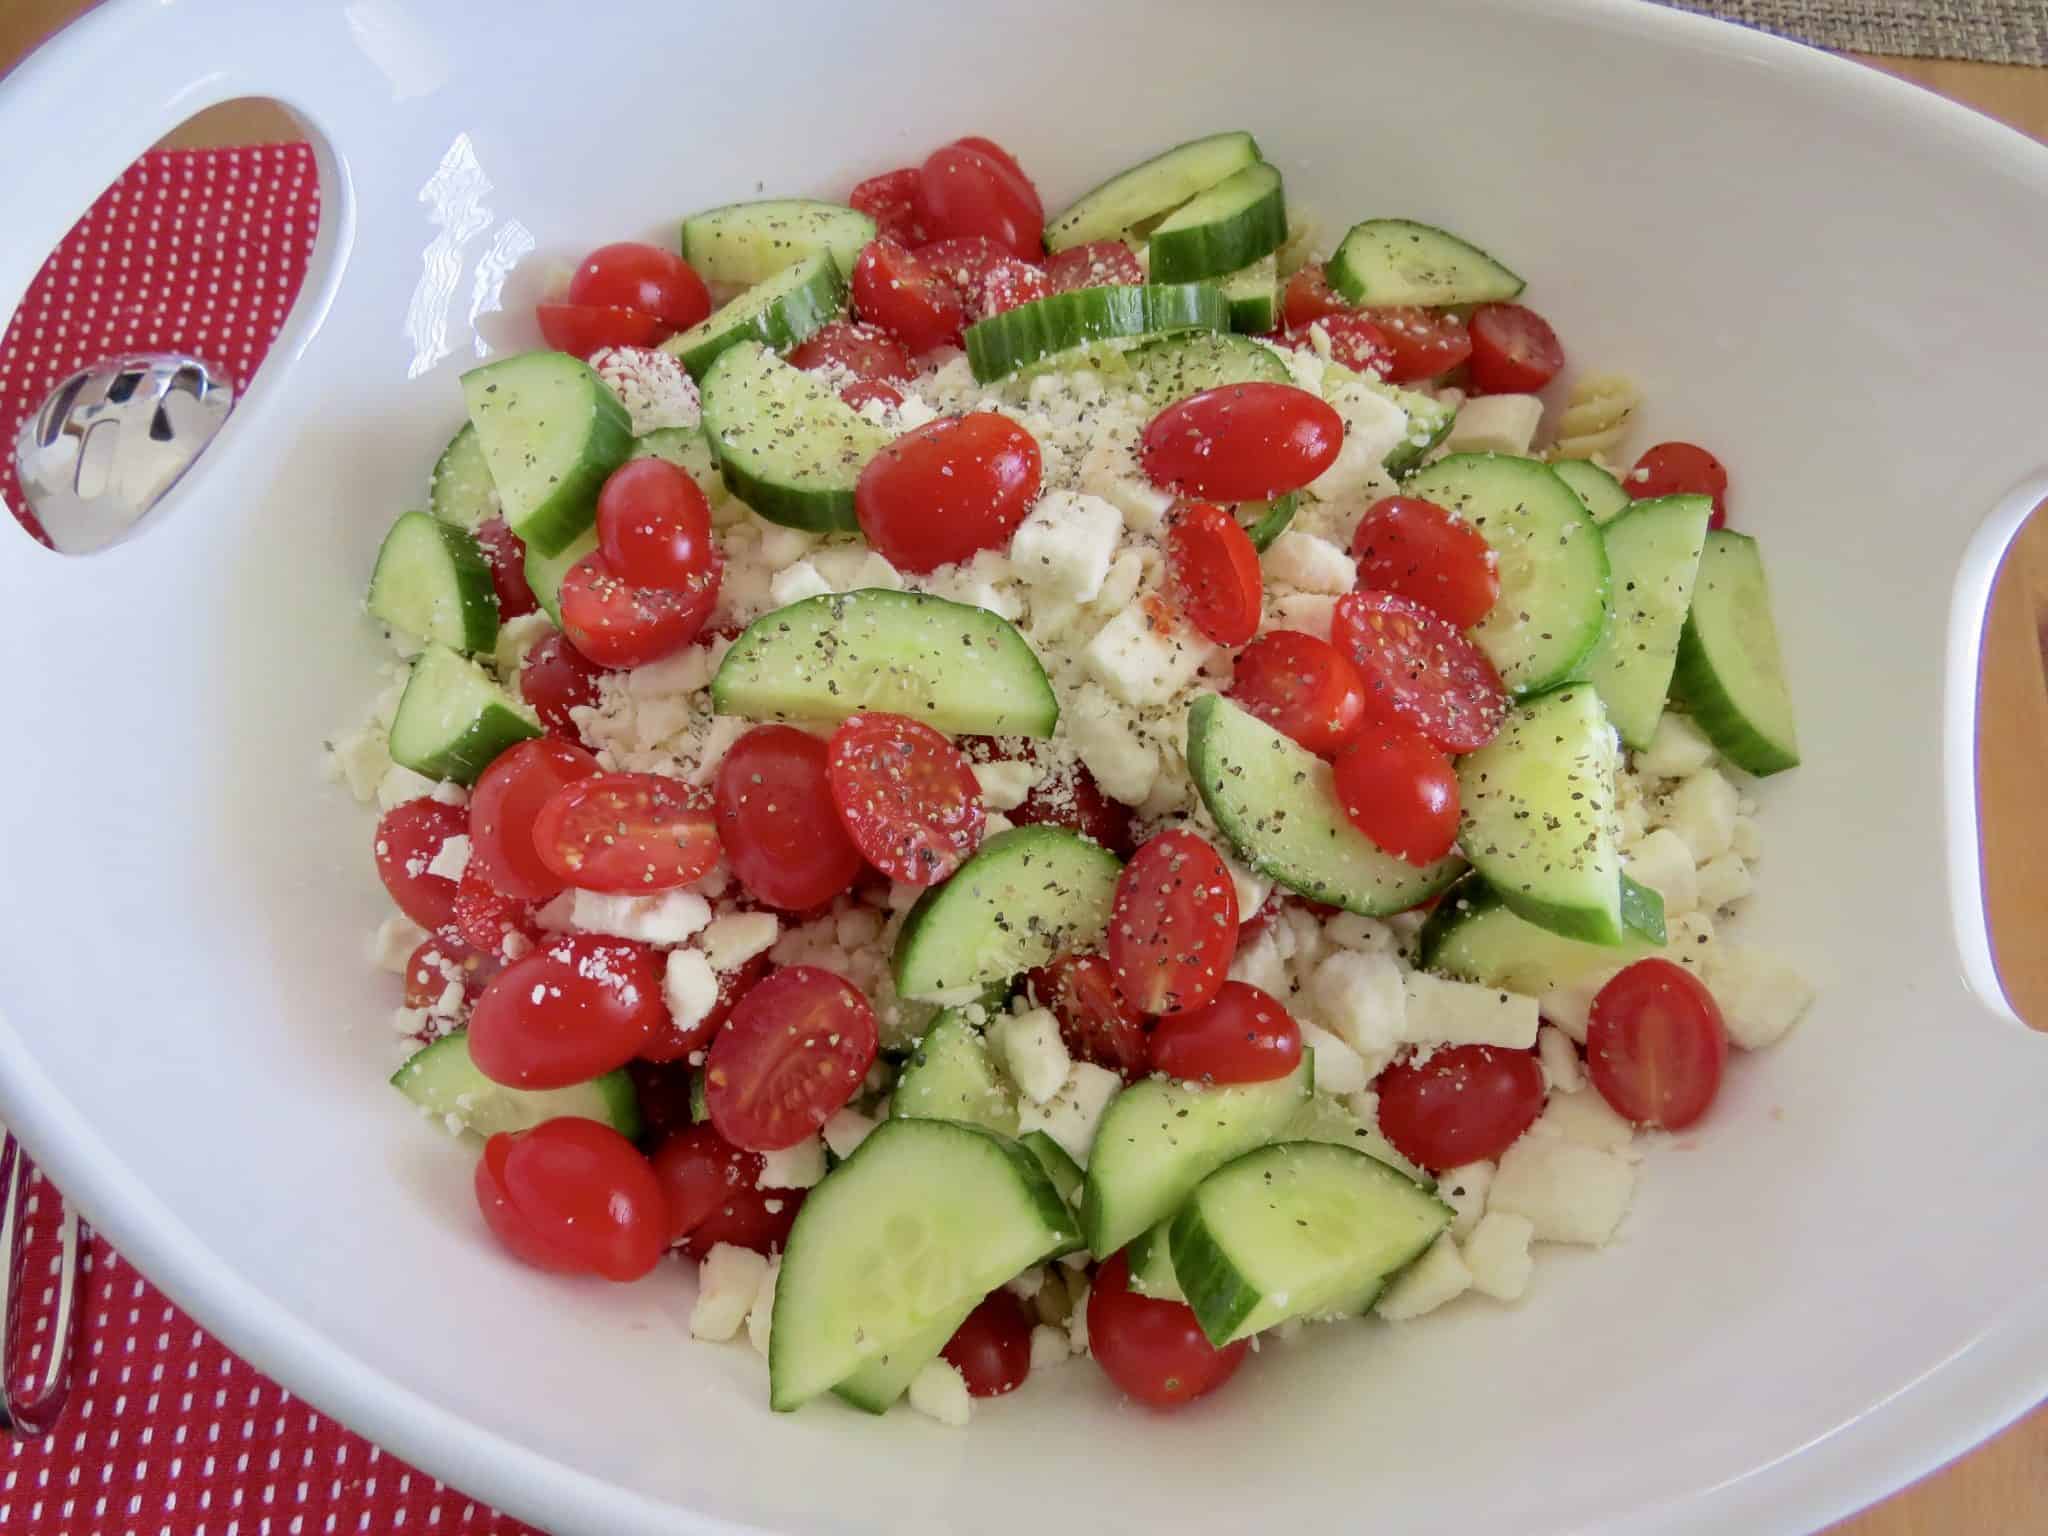 tomatoes, cucumbers, feta cheese and rotini pasta in a large white serving bowl.